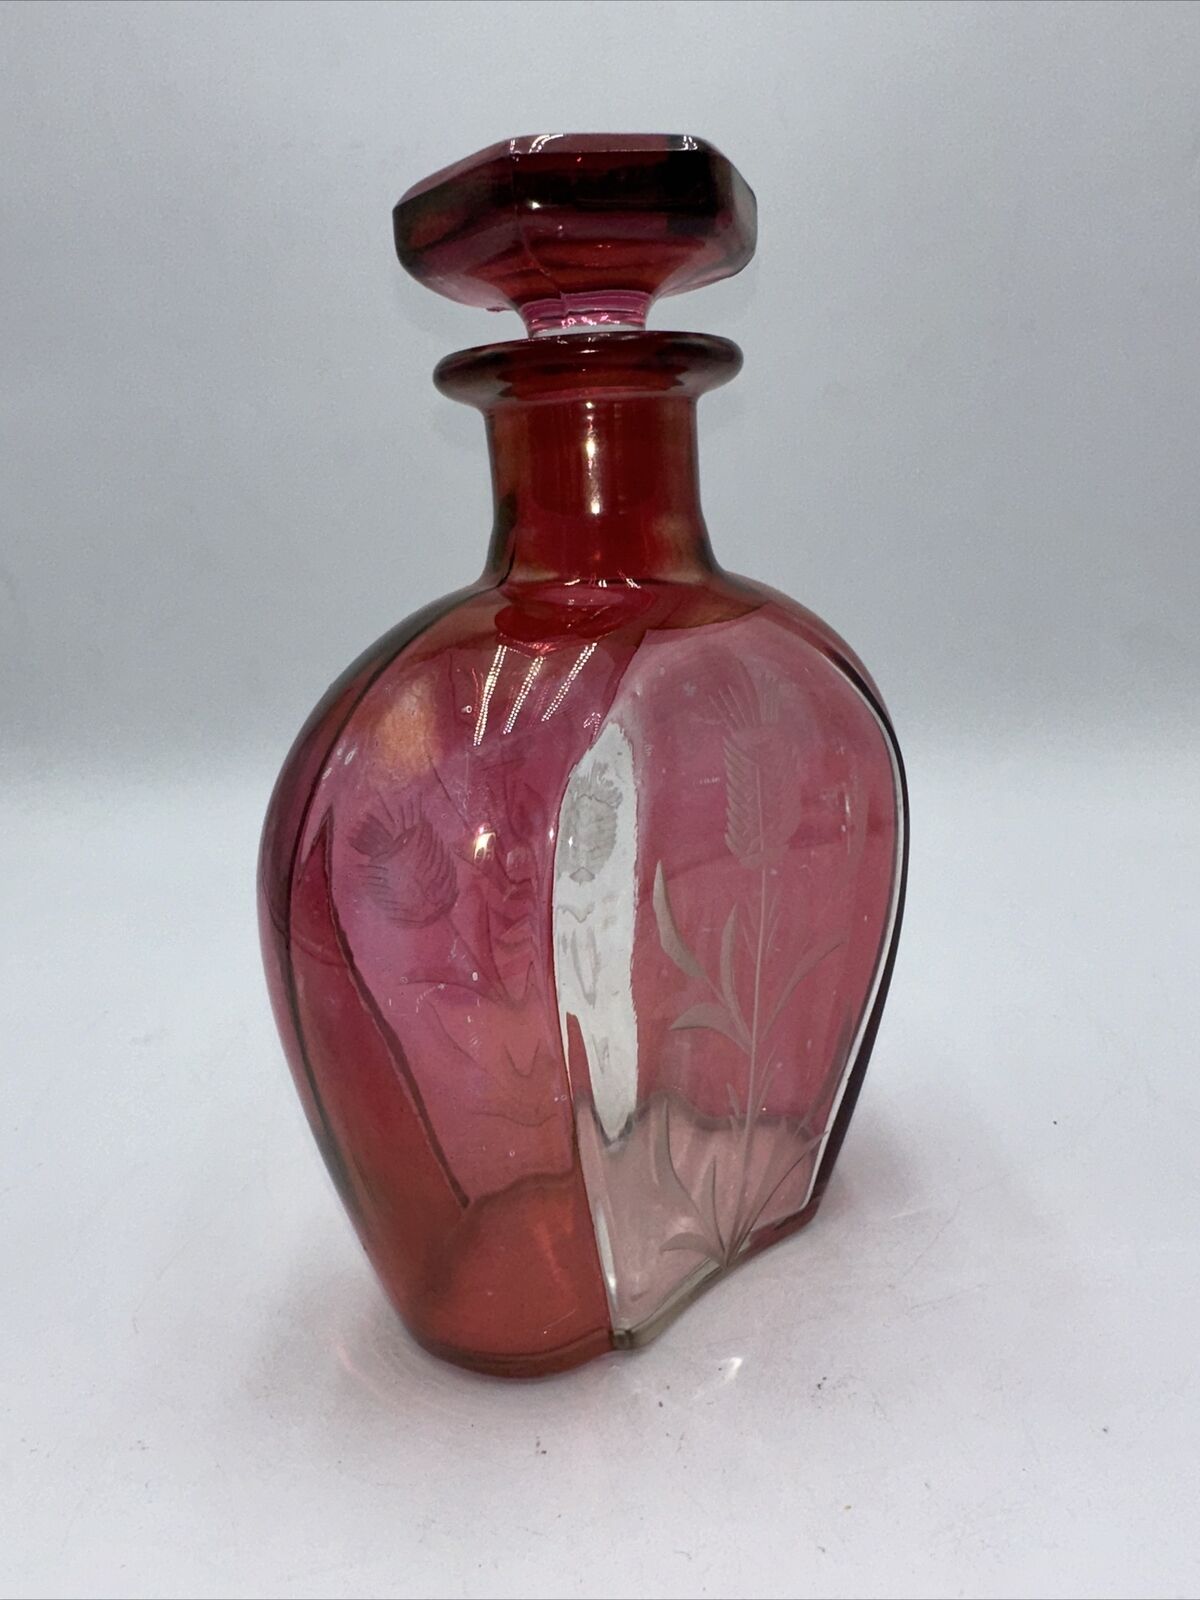 VTG Antique? Bohemian Red Flashed Thistle Etched Decanter w/ Stopper Estate Item